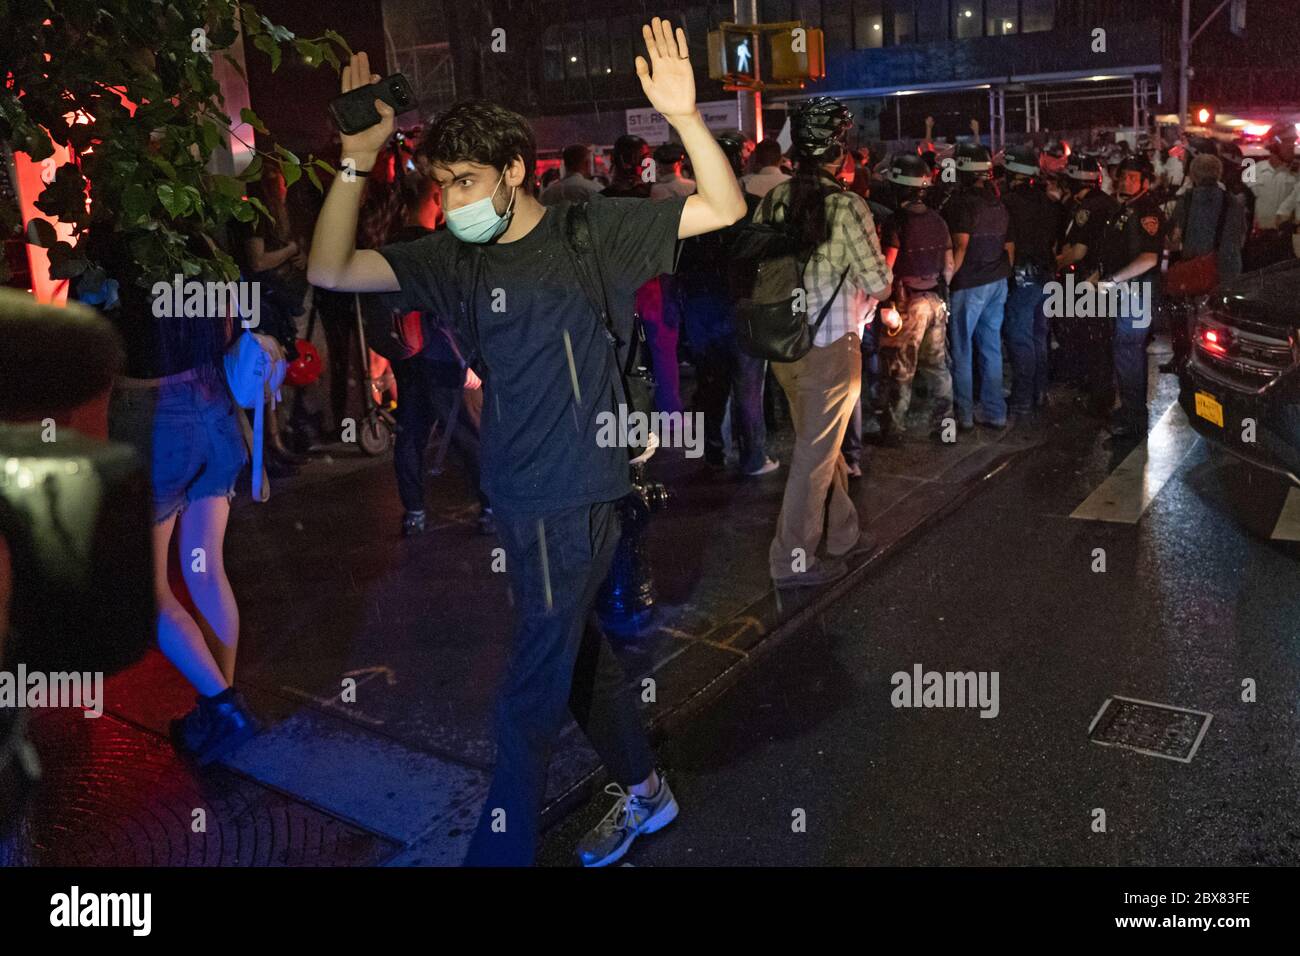 NEW YORK, NY - JUNE 03: Protester walking away with his hands raise as police make dozens of arrests during demonstrations in Manhattan over the killi Stock Photo